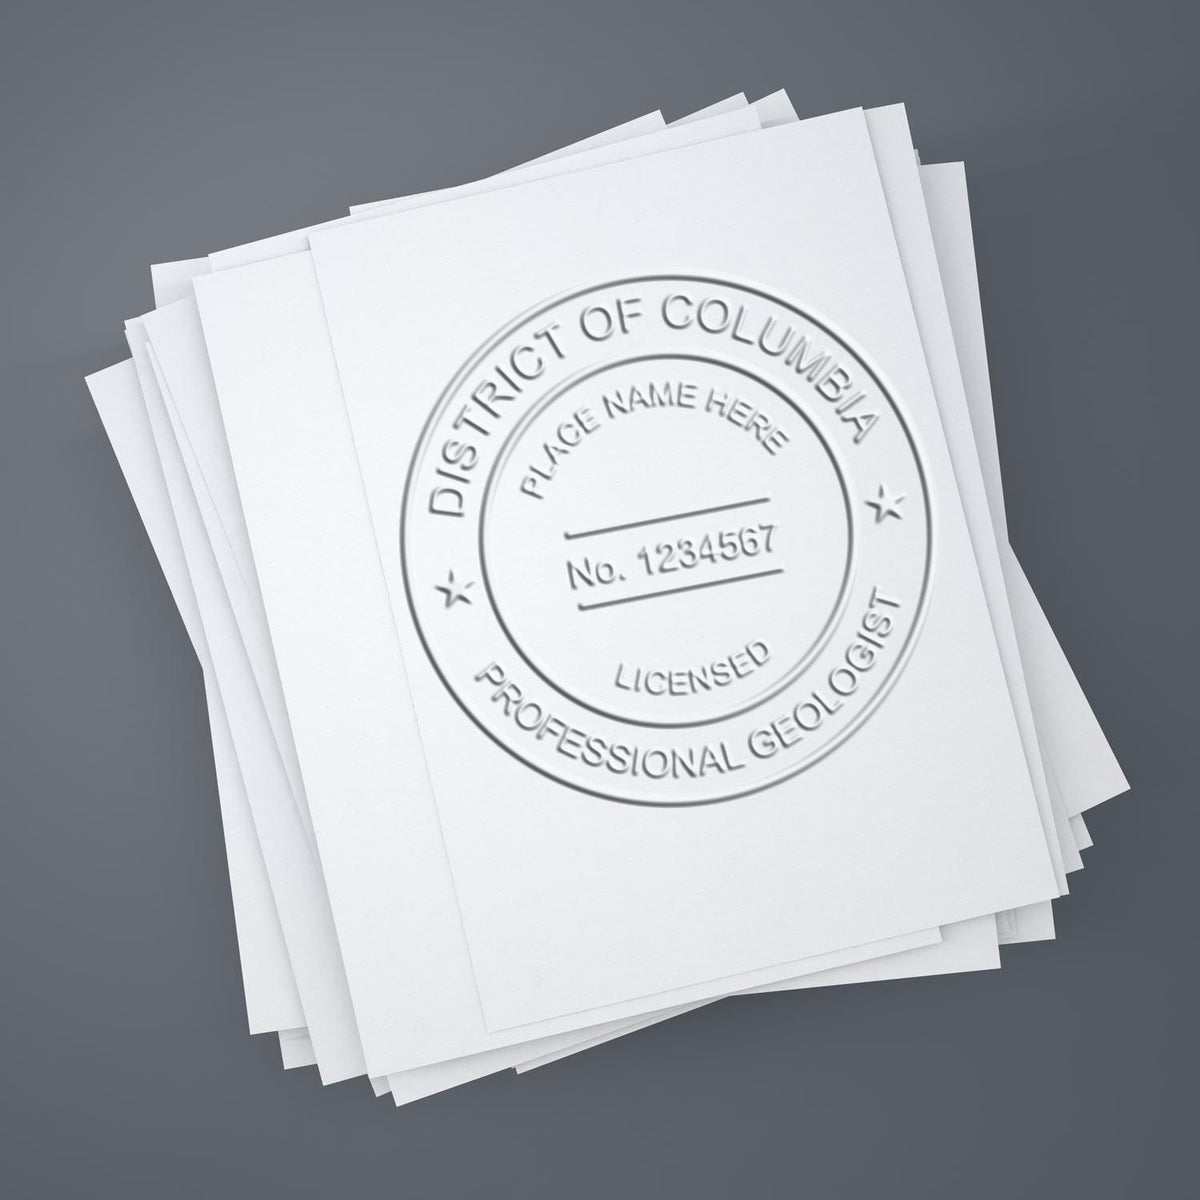 An in use photo of the Soft District of Columbia Professional Geologist Seal showing a sample imprint on a cardstock